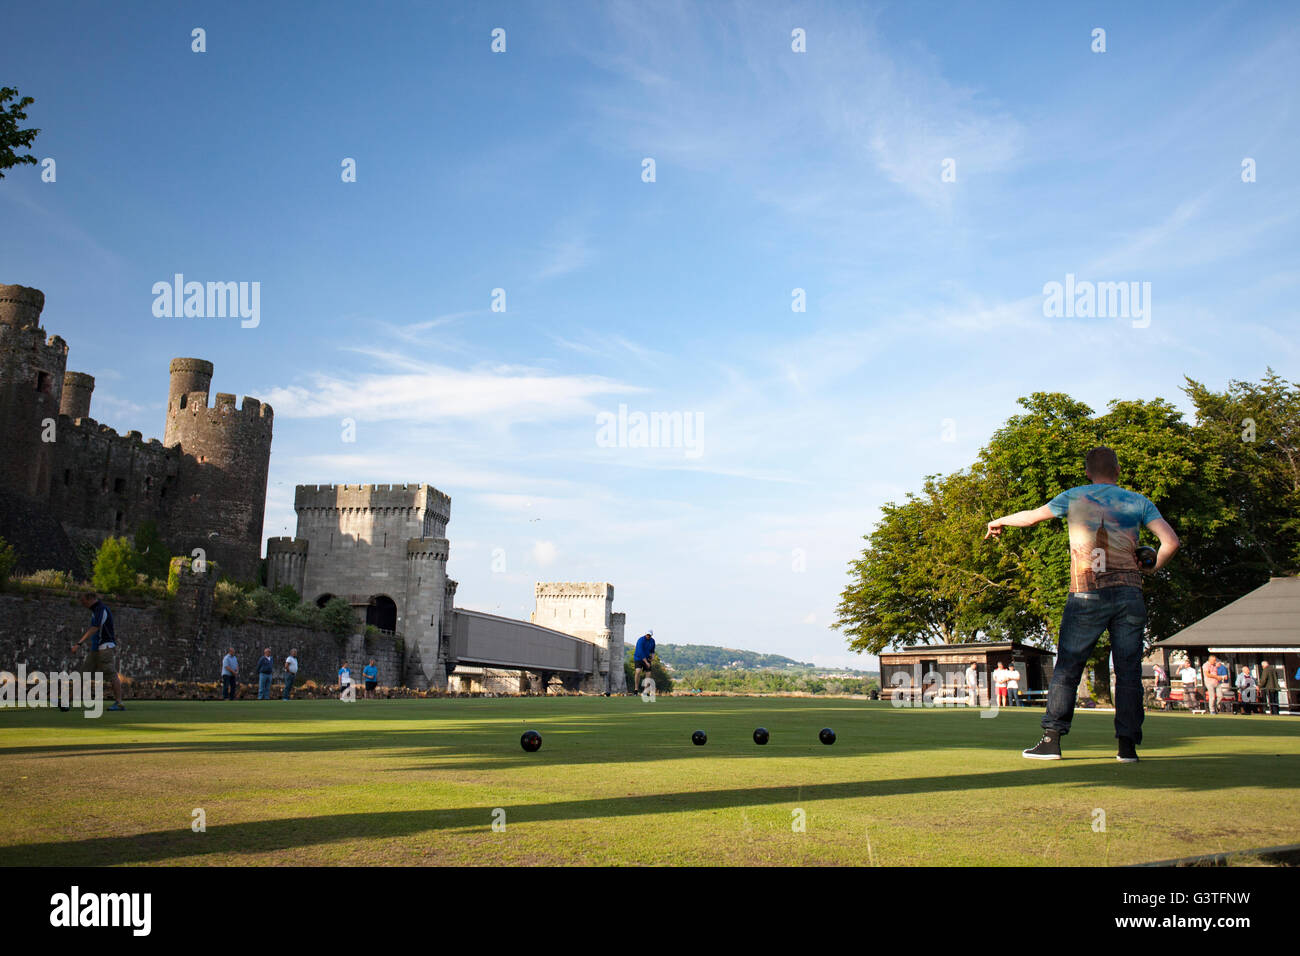 Conwy Bowling Club a crown green bowling venue next to the majestic medieval Conwy Castle on a hot summers evening with bowlers passing the time away relaxing on the green, Conwy, Wales, UK Stock Photo